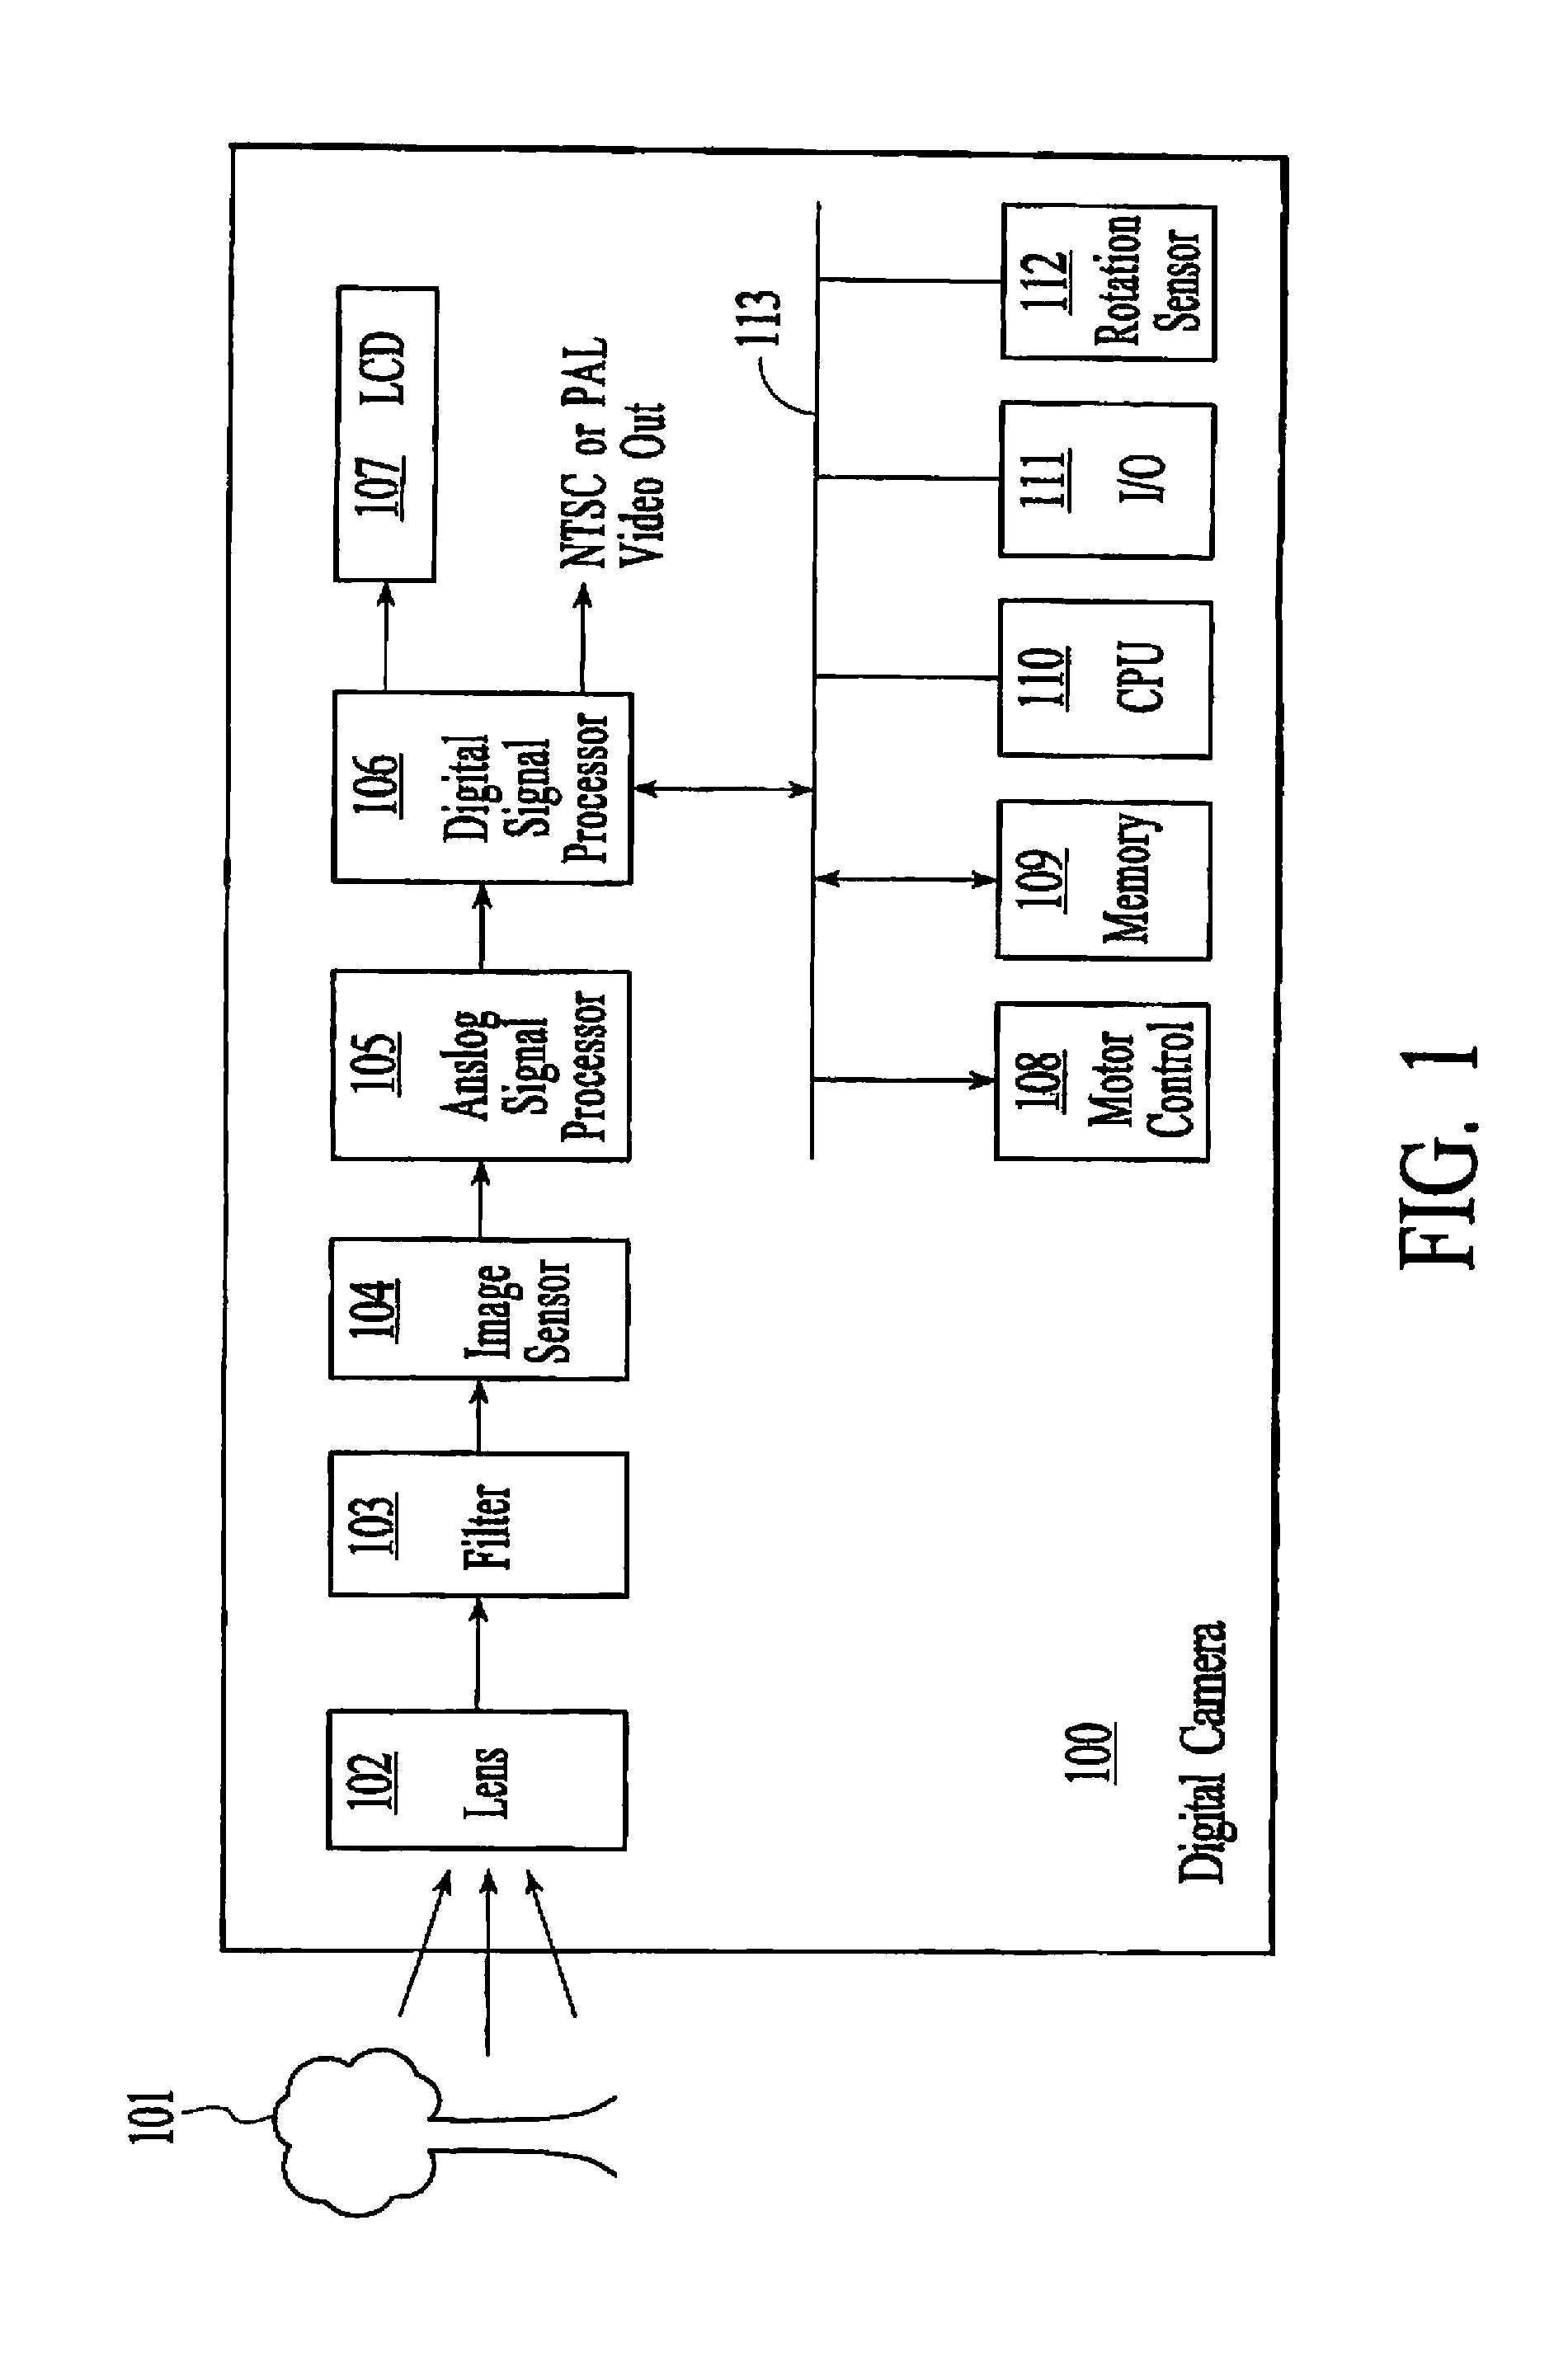 Image processing system for high performance digital imaging devices